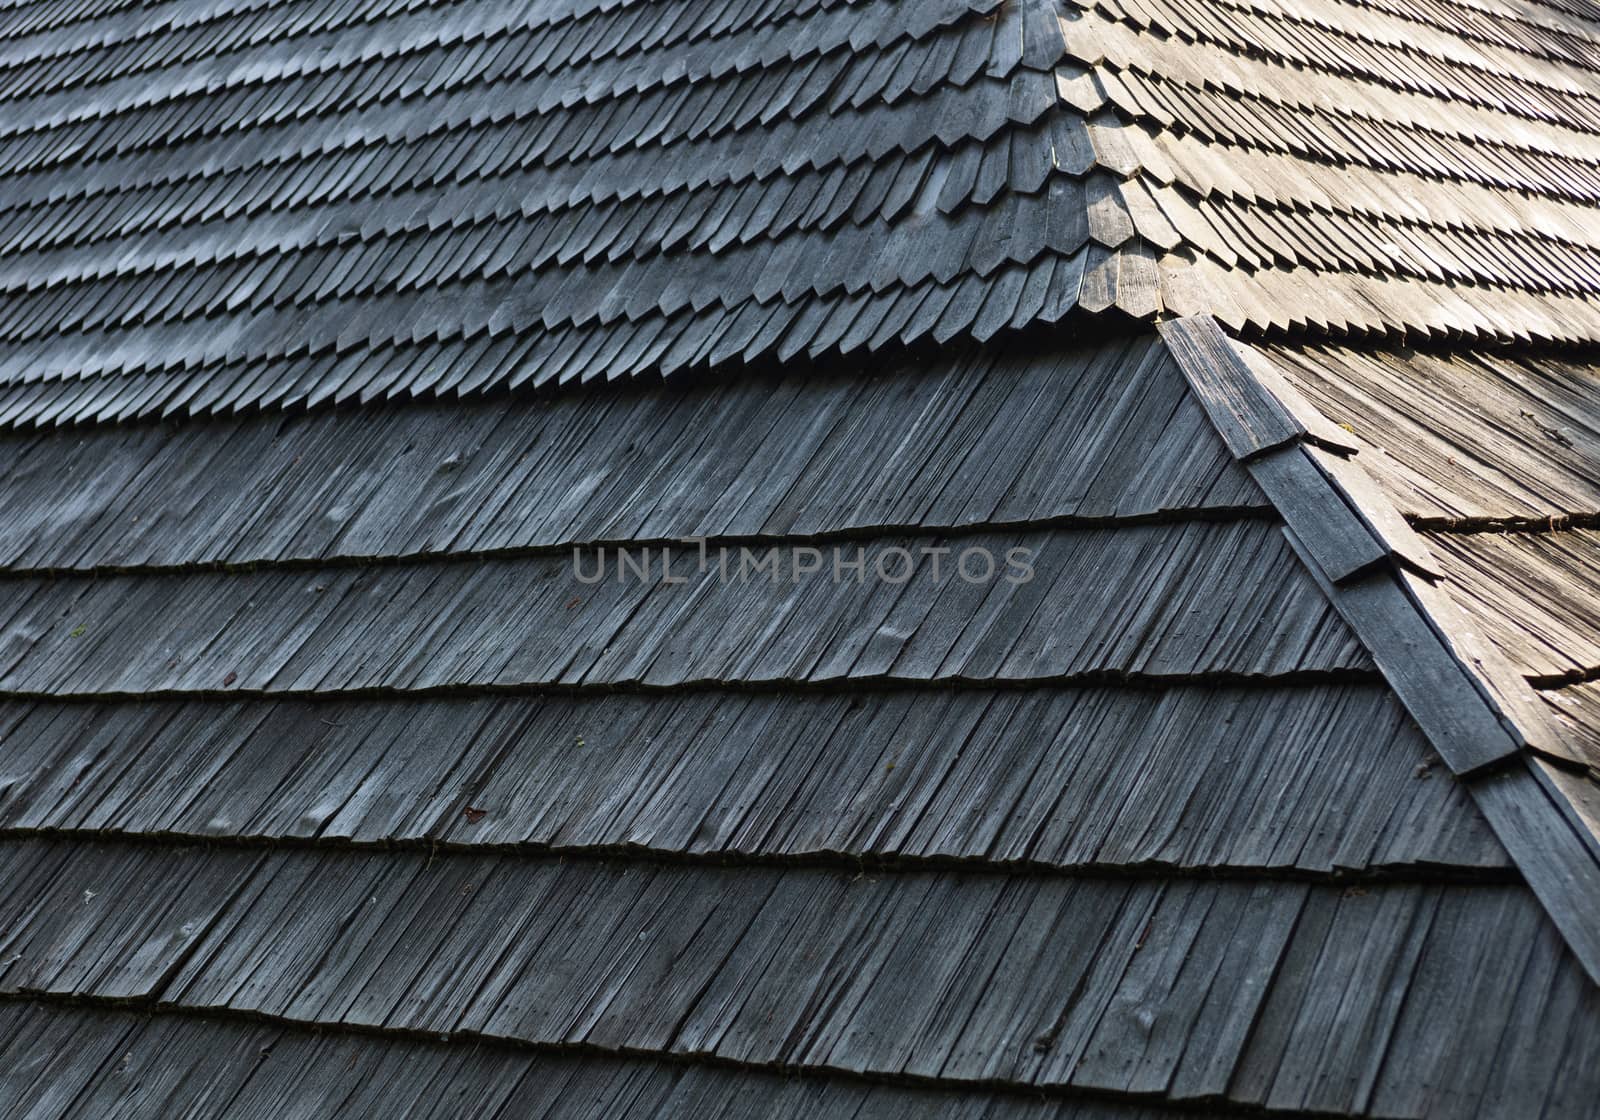 Old wooden shingle roof with rich texture.